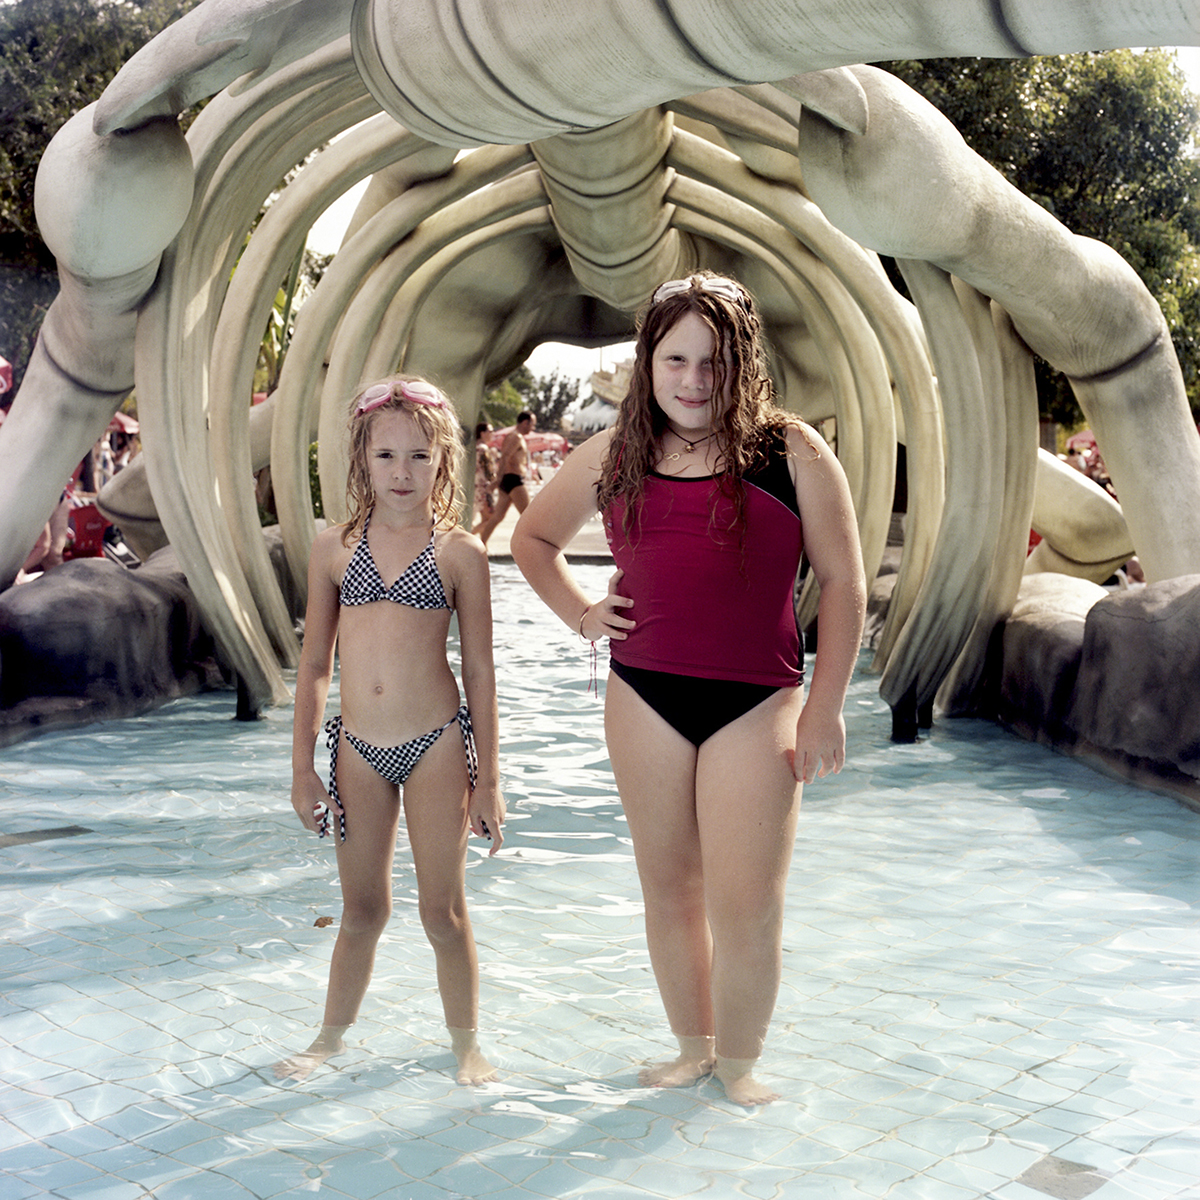 The series “Water Park” from Roberta Sant’Anna was made over the course of ...